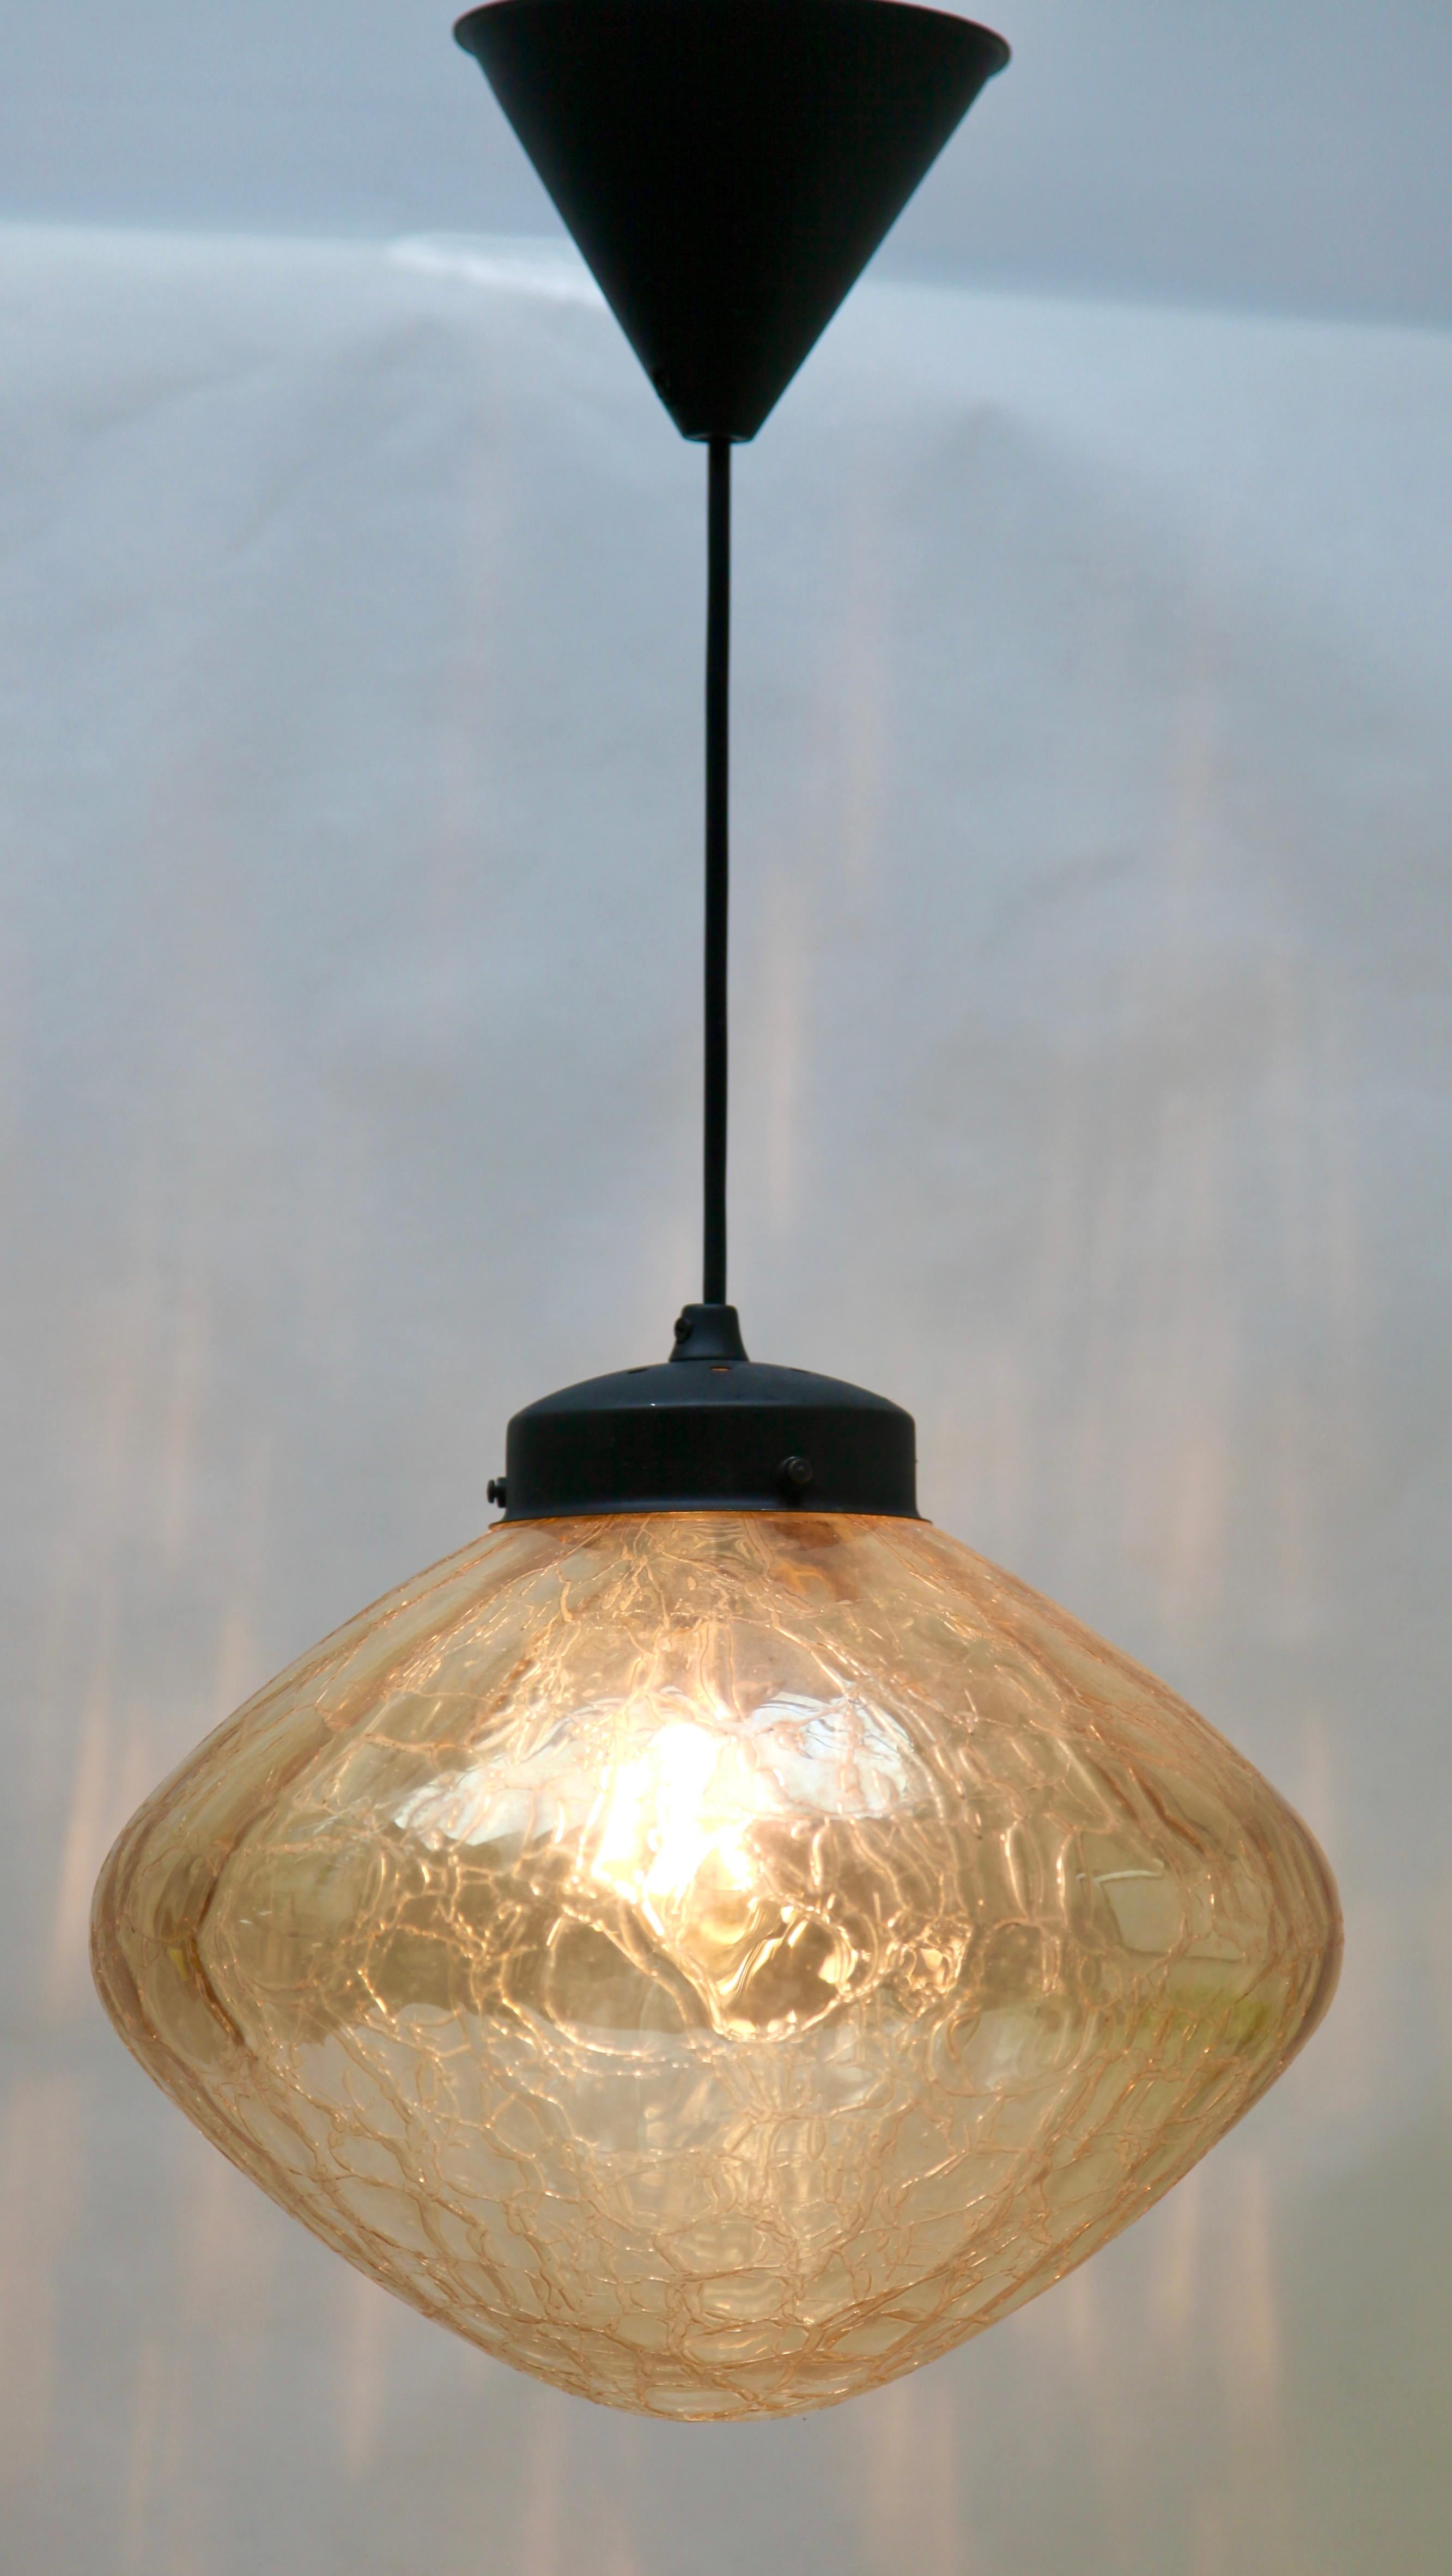 Pendant by Glashütte Limburg during Helena Tyrell Era, 1960s

In excellent condition and in full working order having recently been re-wired

Measures: Lamp total height 22.83 inch
Size: Glass shade height 20 cm 7.67 inch x diameter 27 cm 10.62